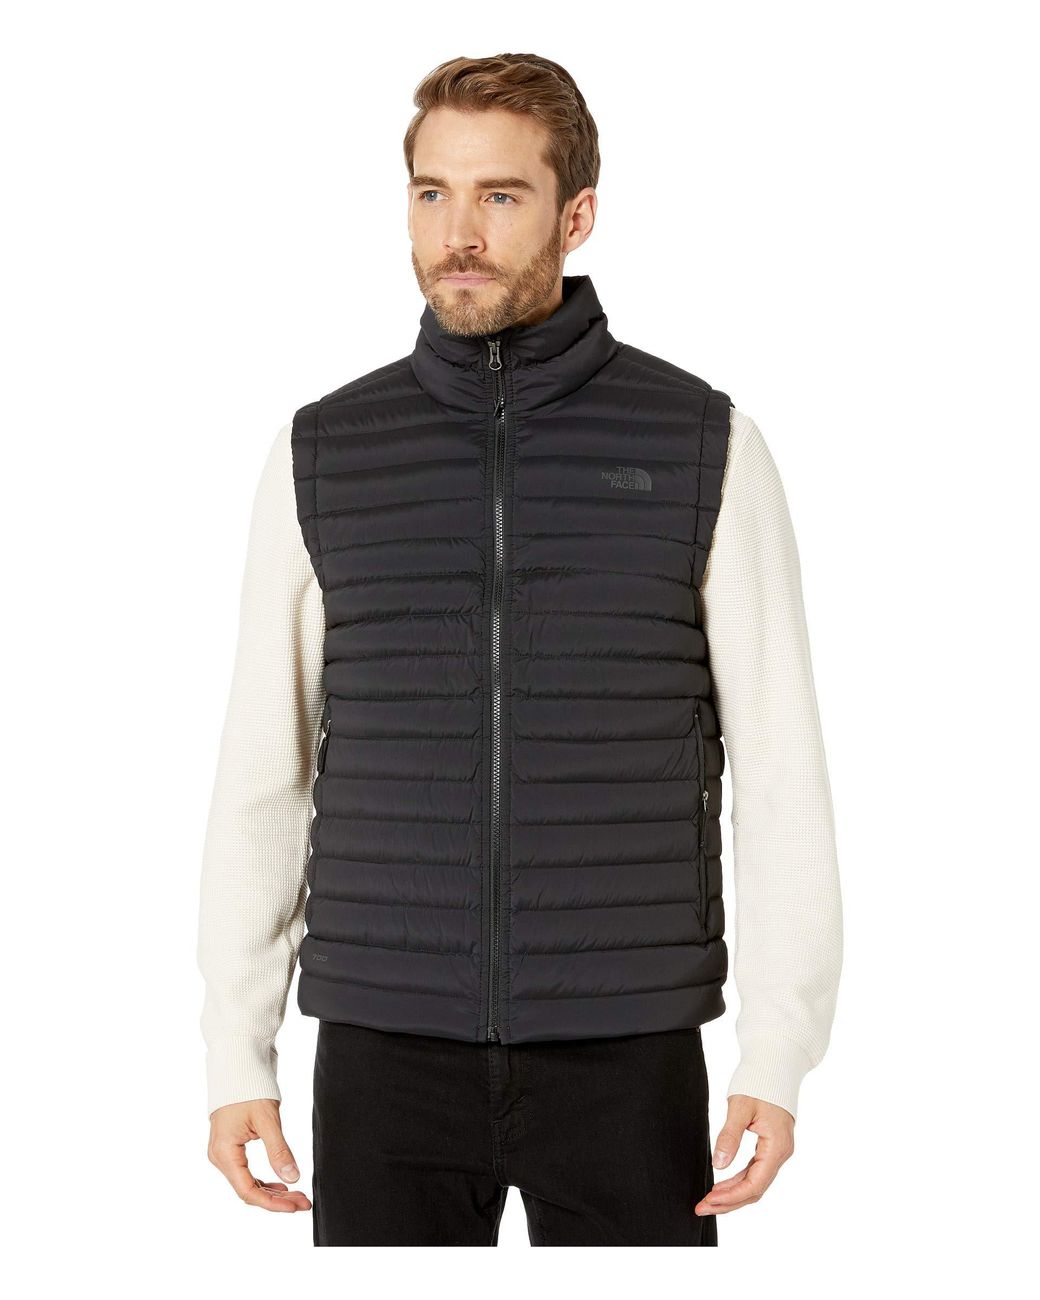 The North Face Goose Stretch Down Vest in Black for Men - Lyst